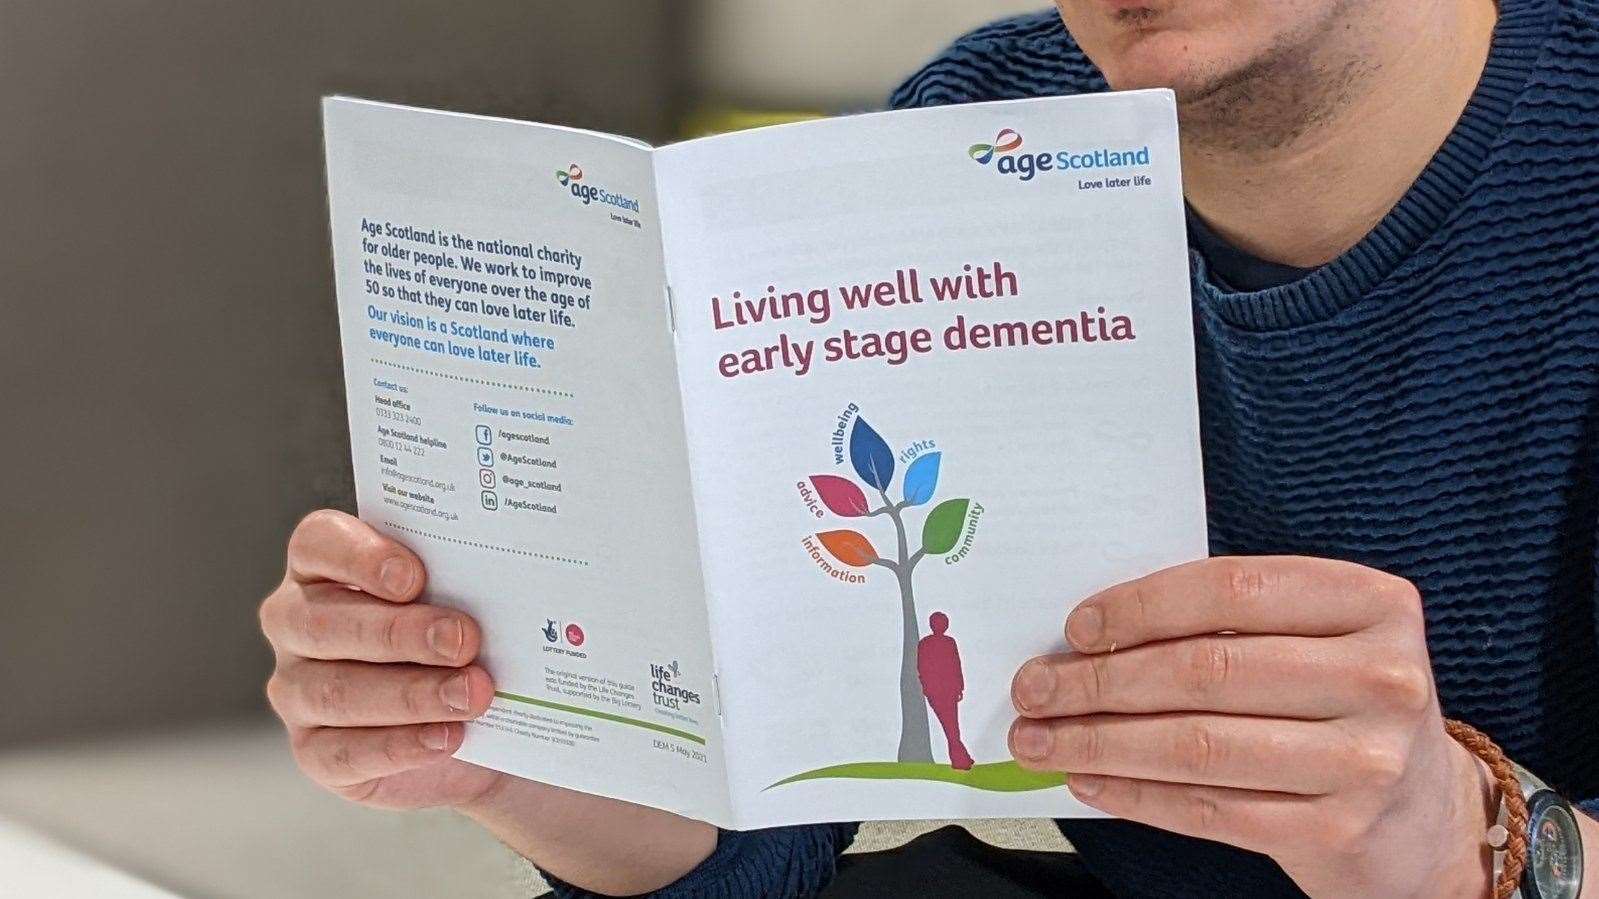 A new round of funding will support community dementia groups.